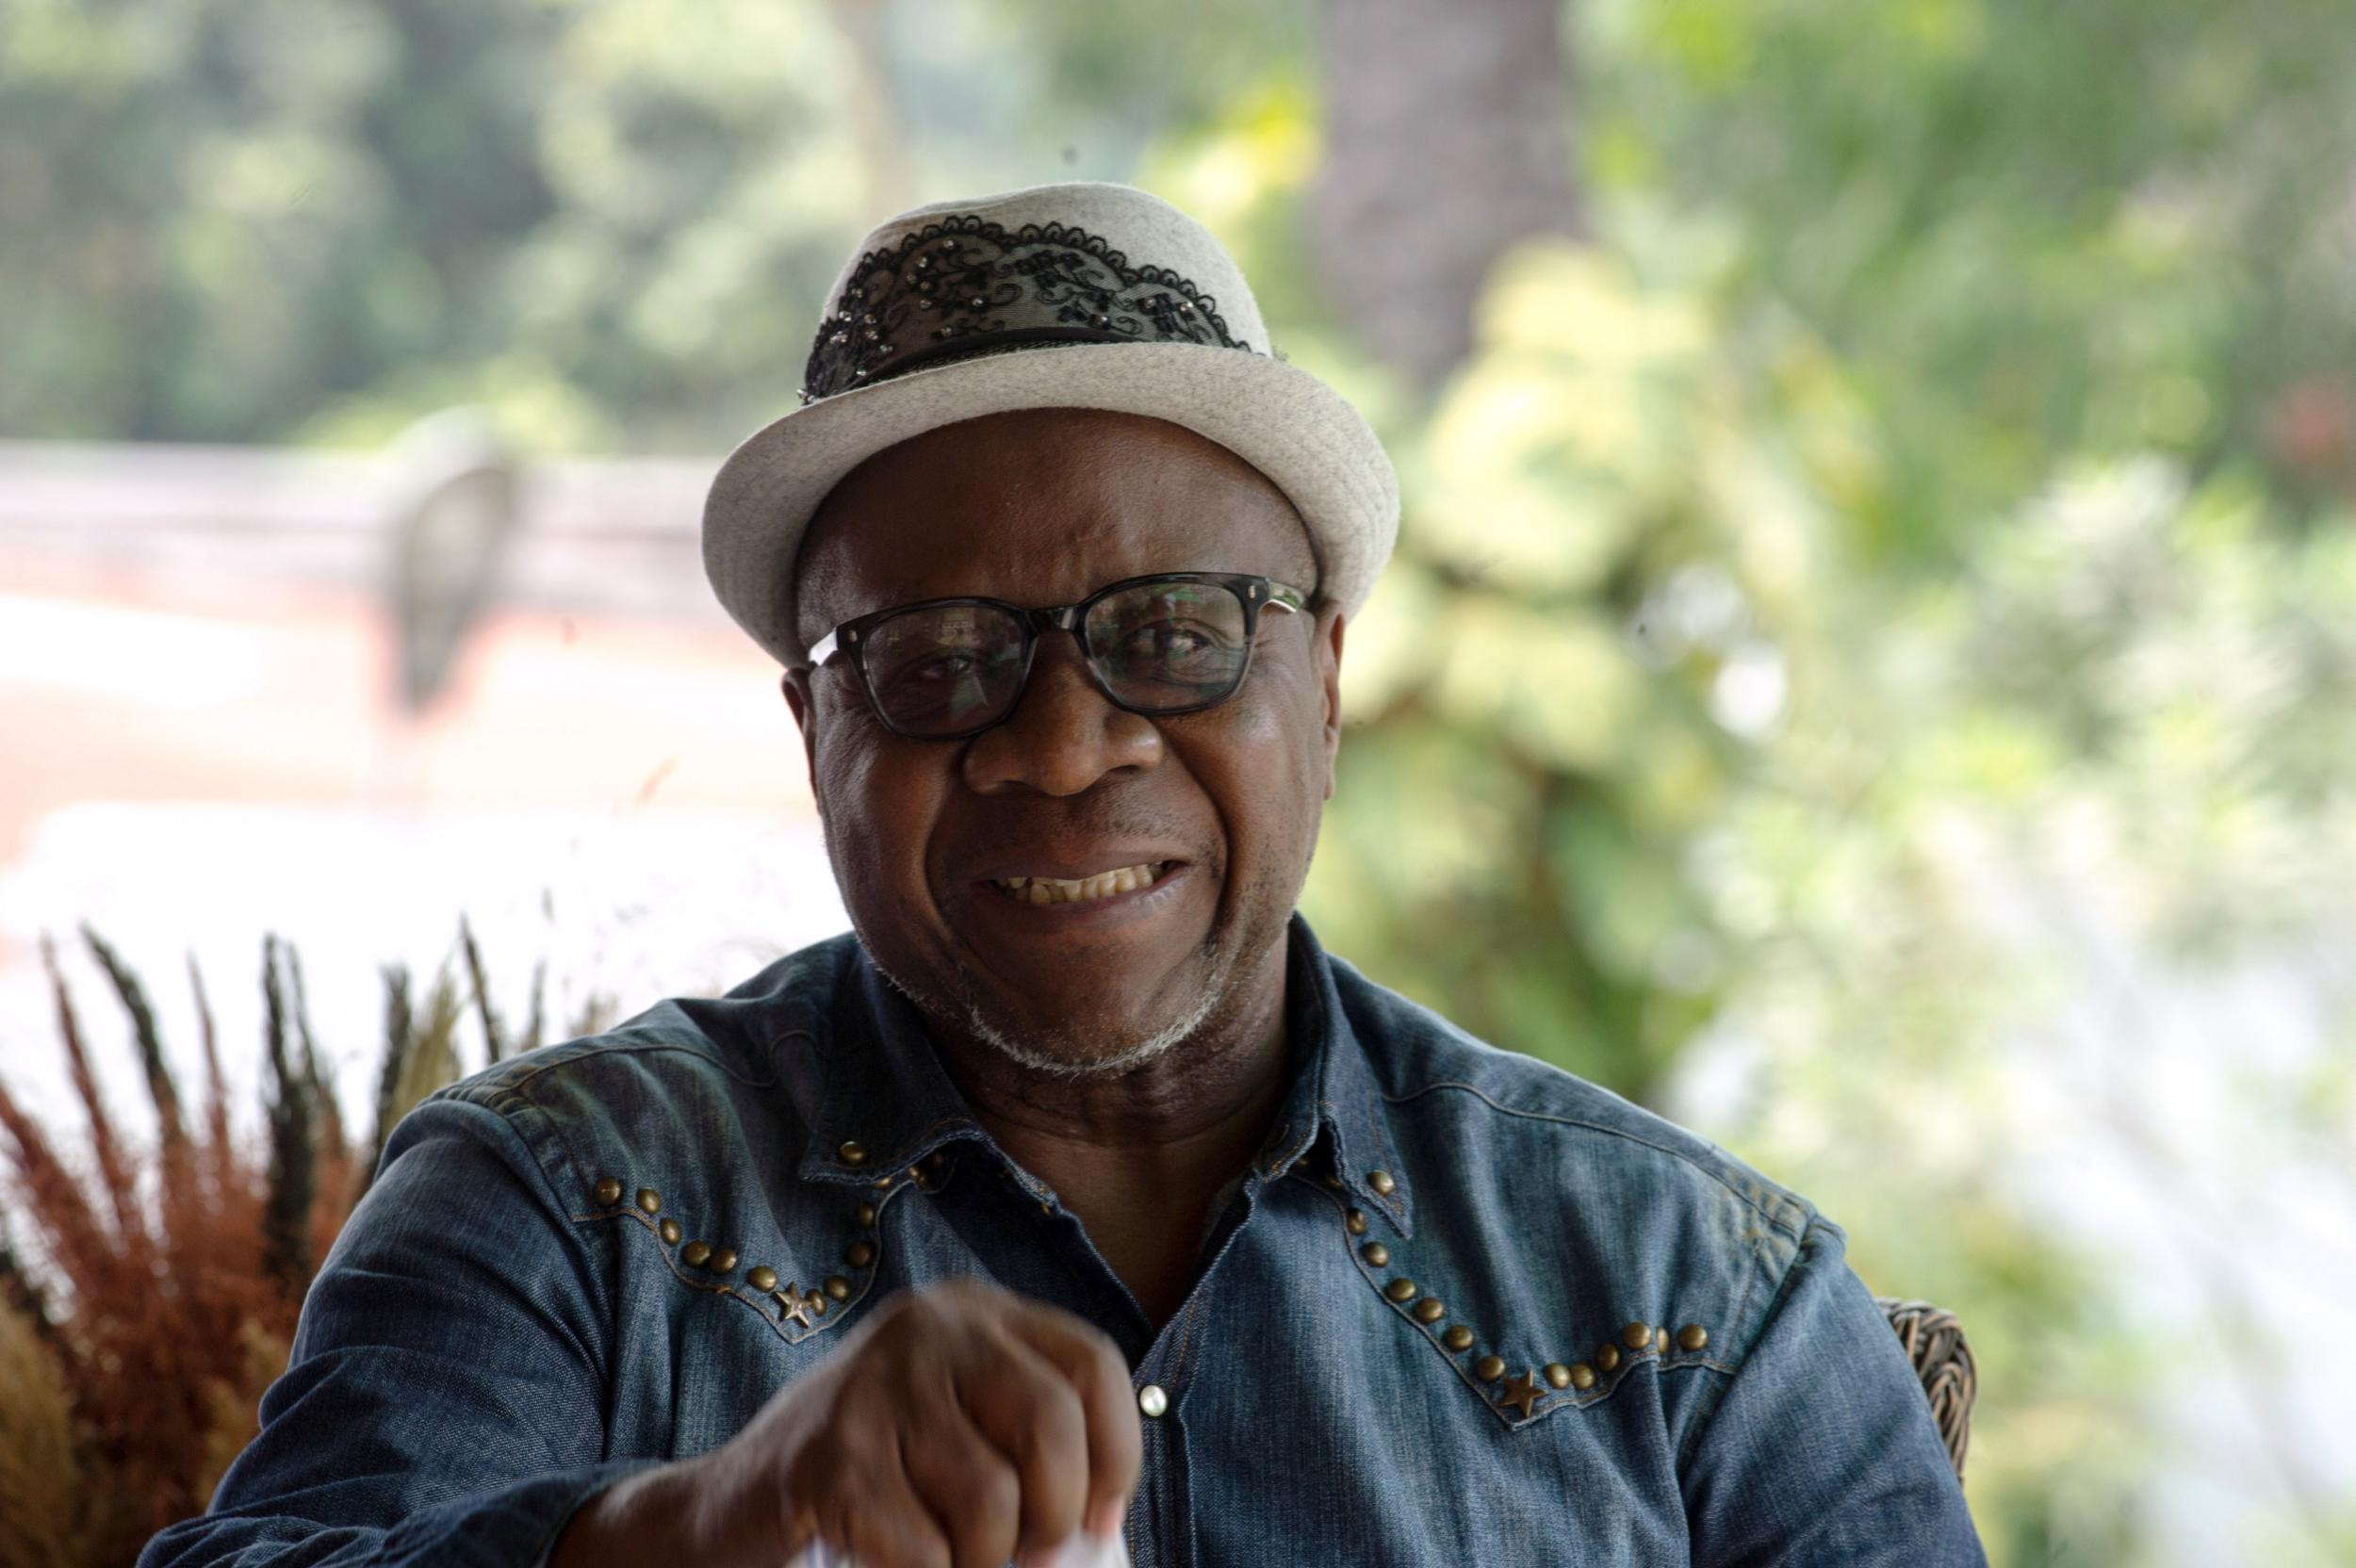 Known as the King of Rhumba Rock Wemba rose to fame in his twenties and went on to gain global and Francophone attention